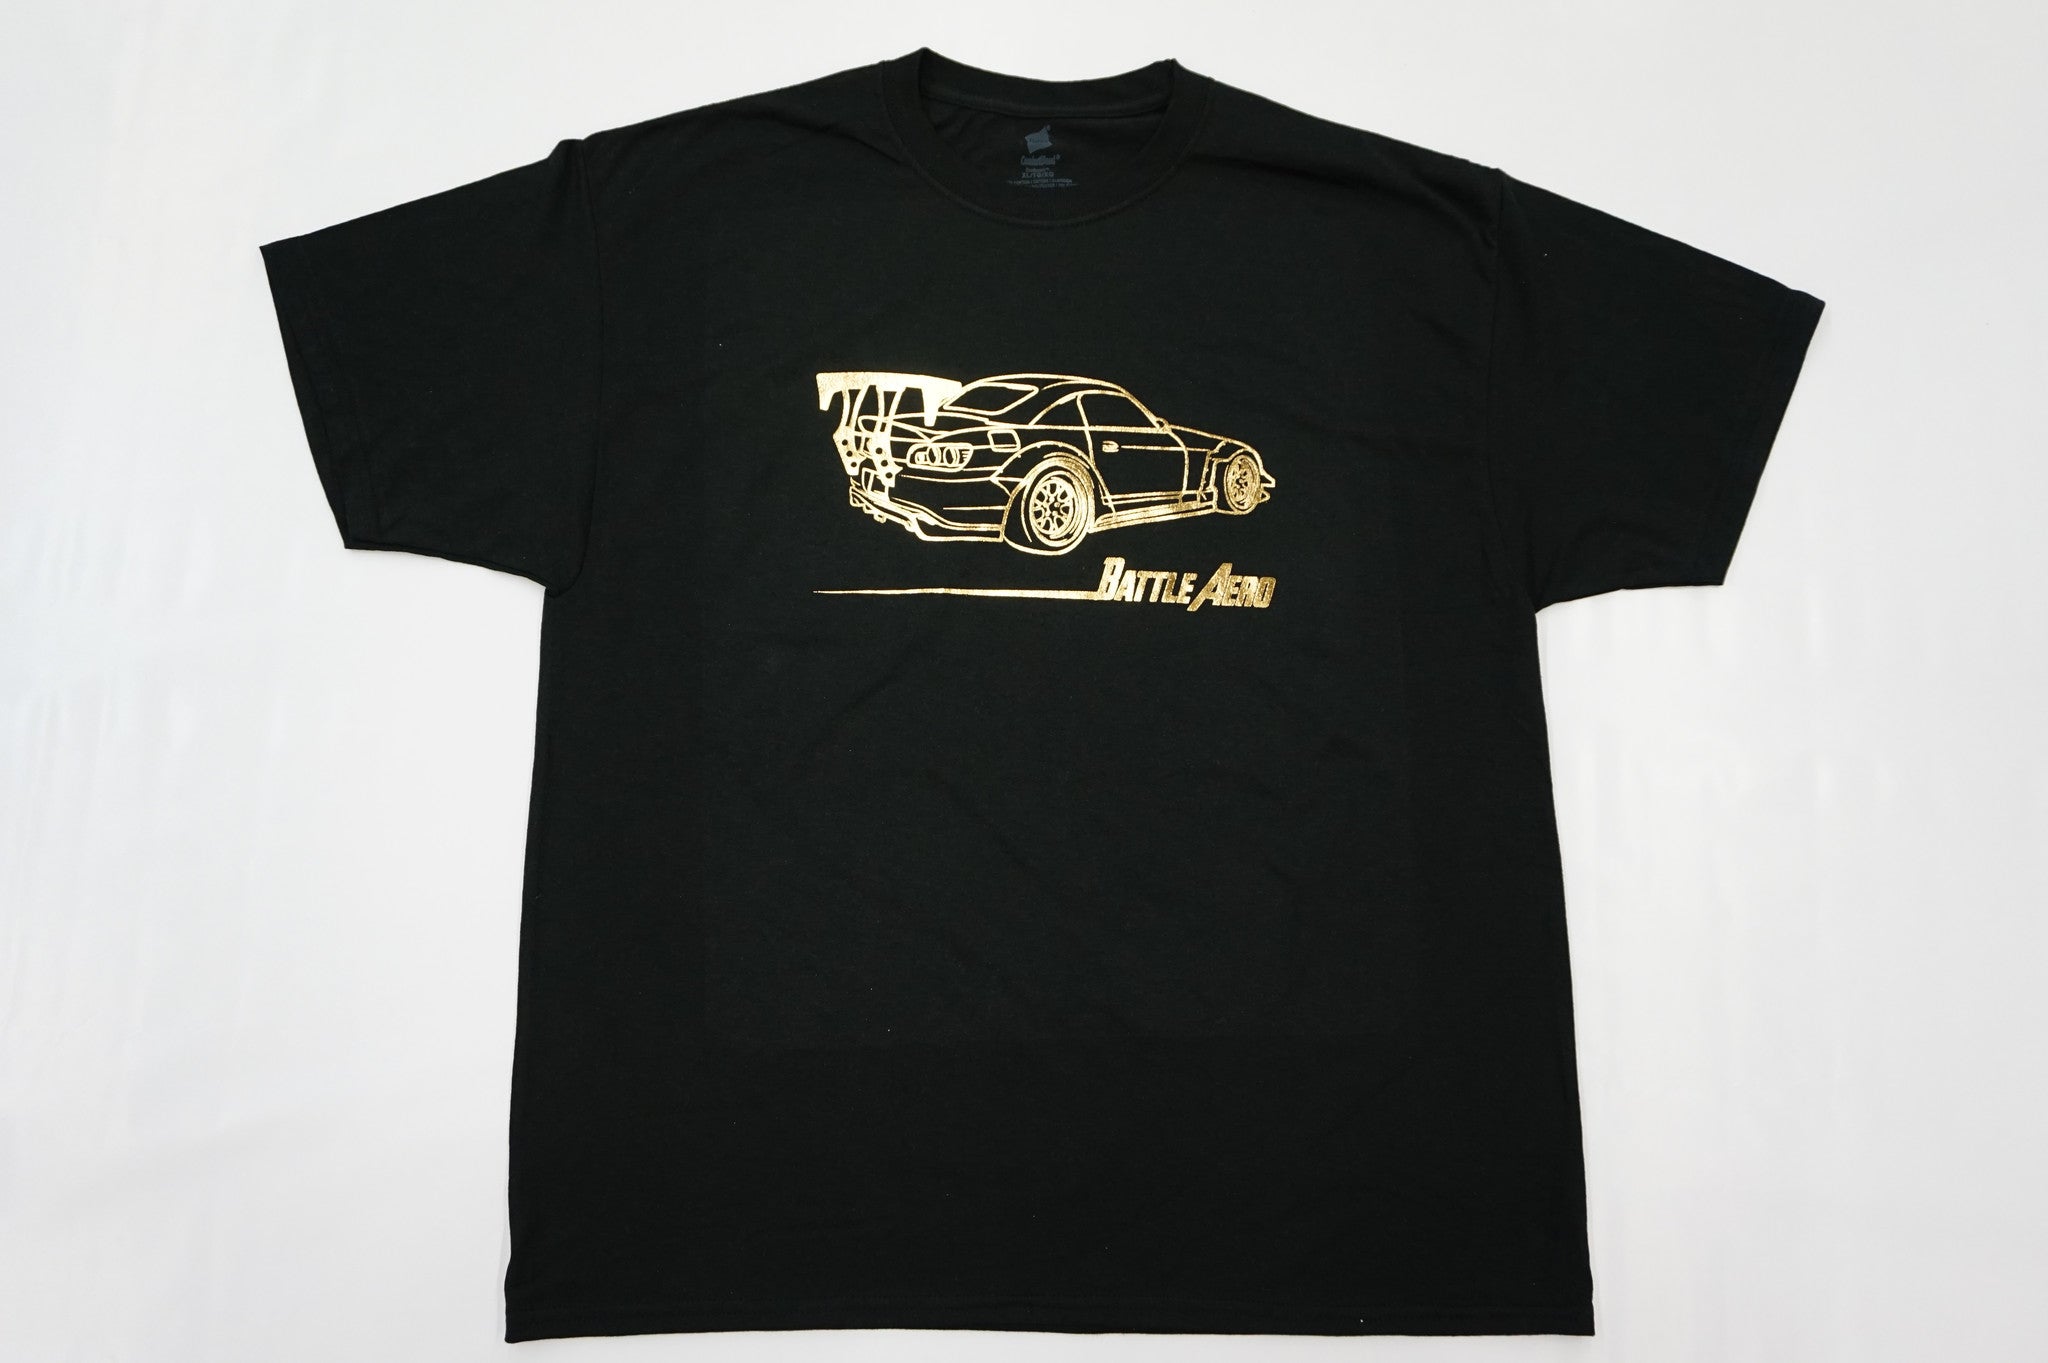 S2000 Chassis Mount T-Shirt